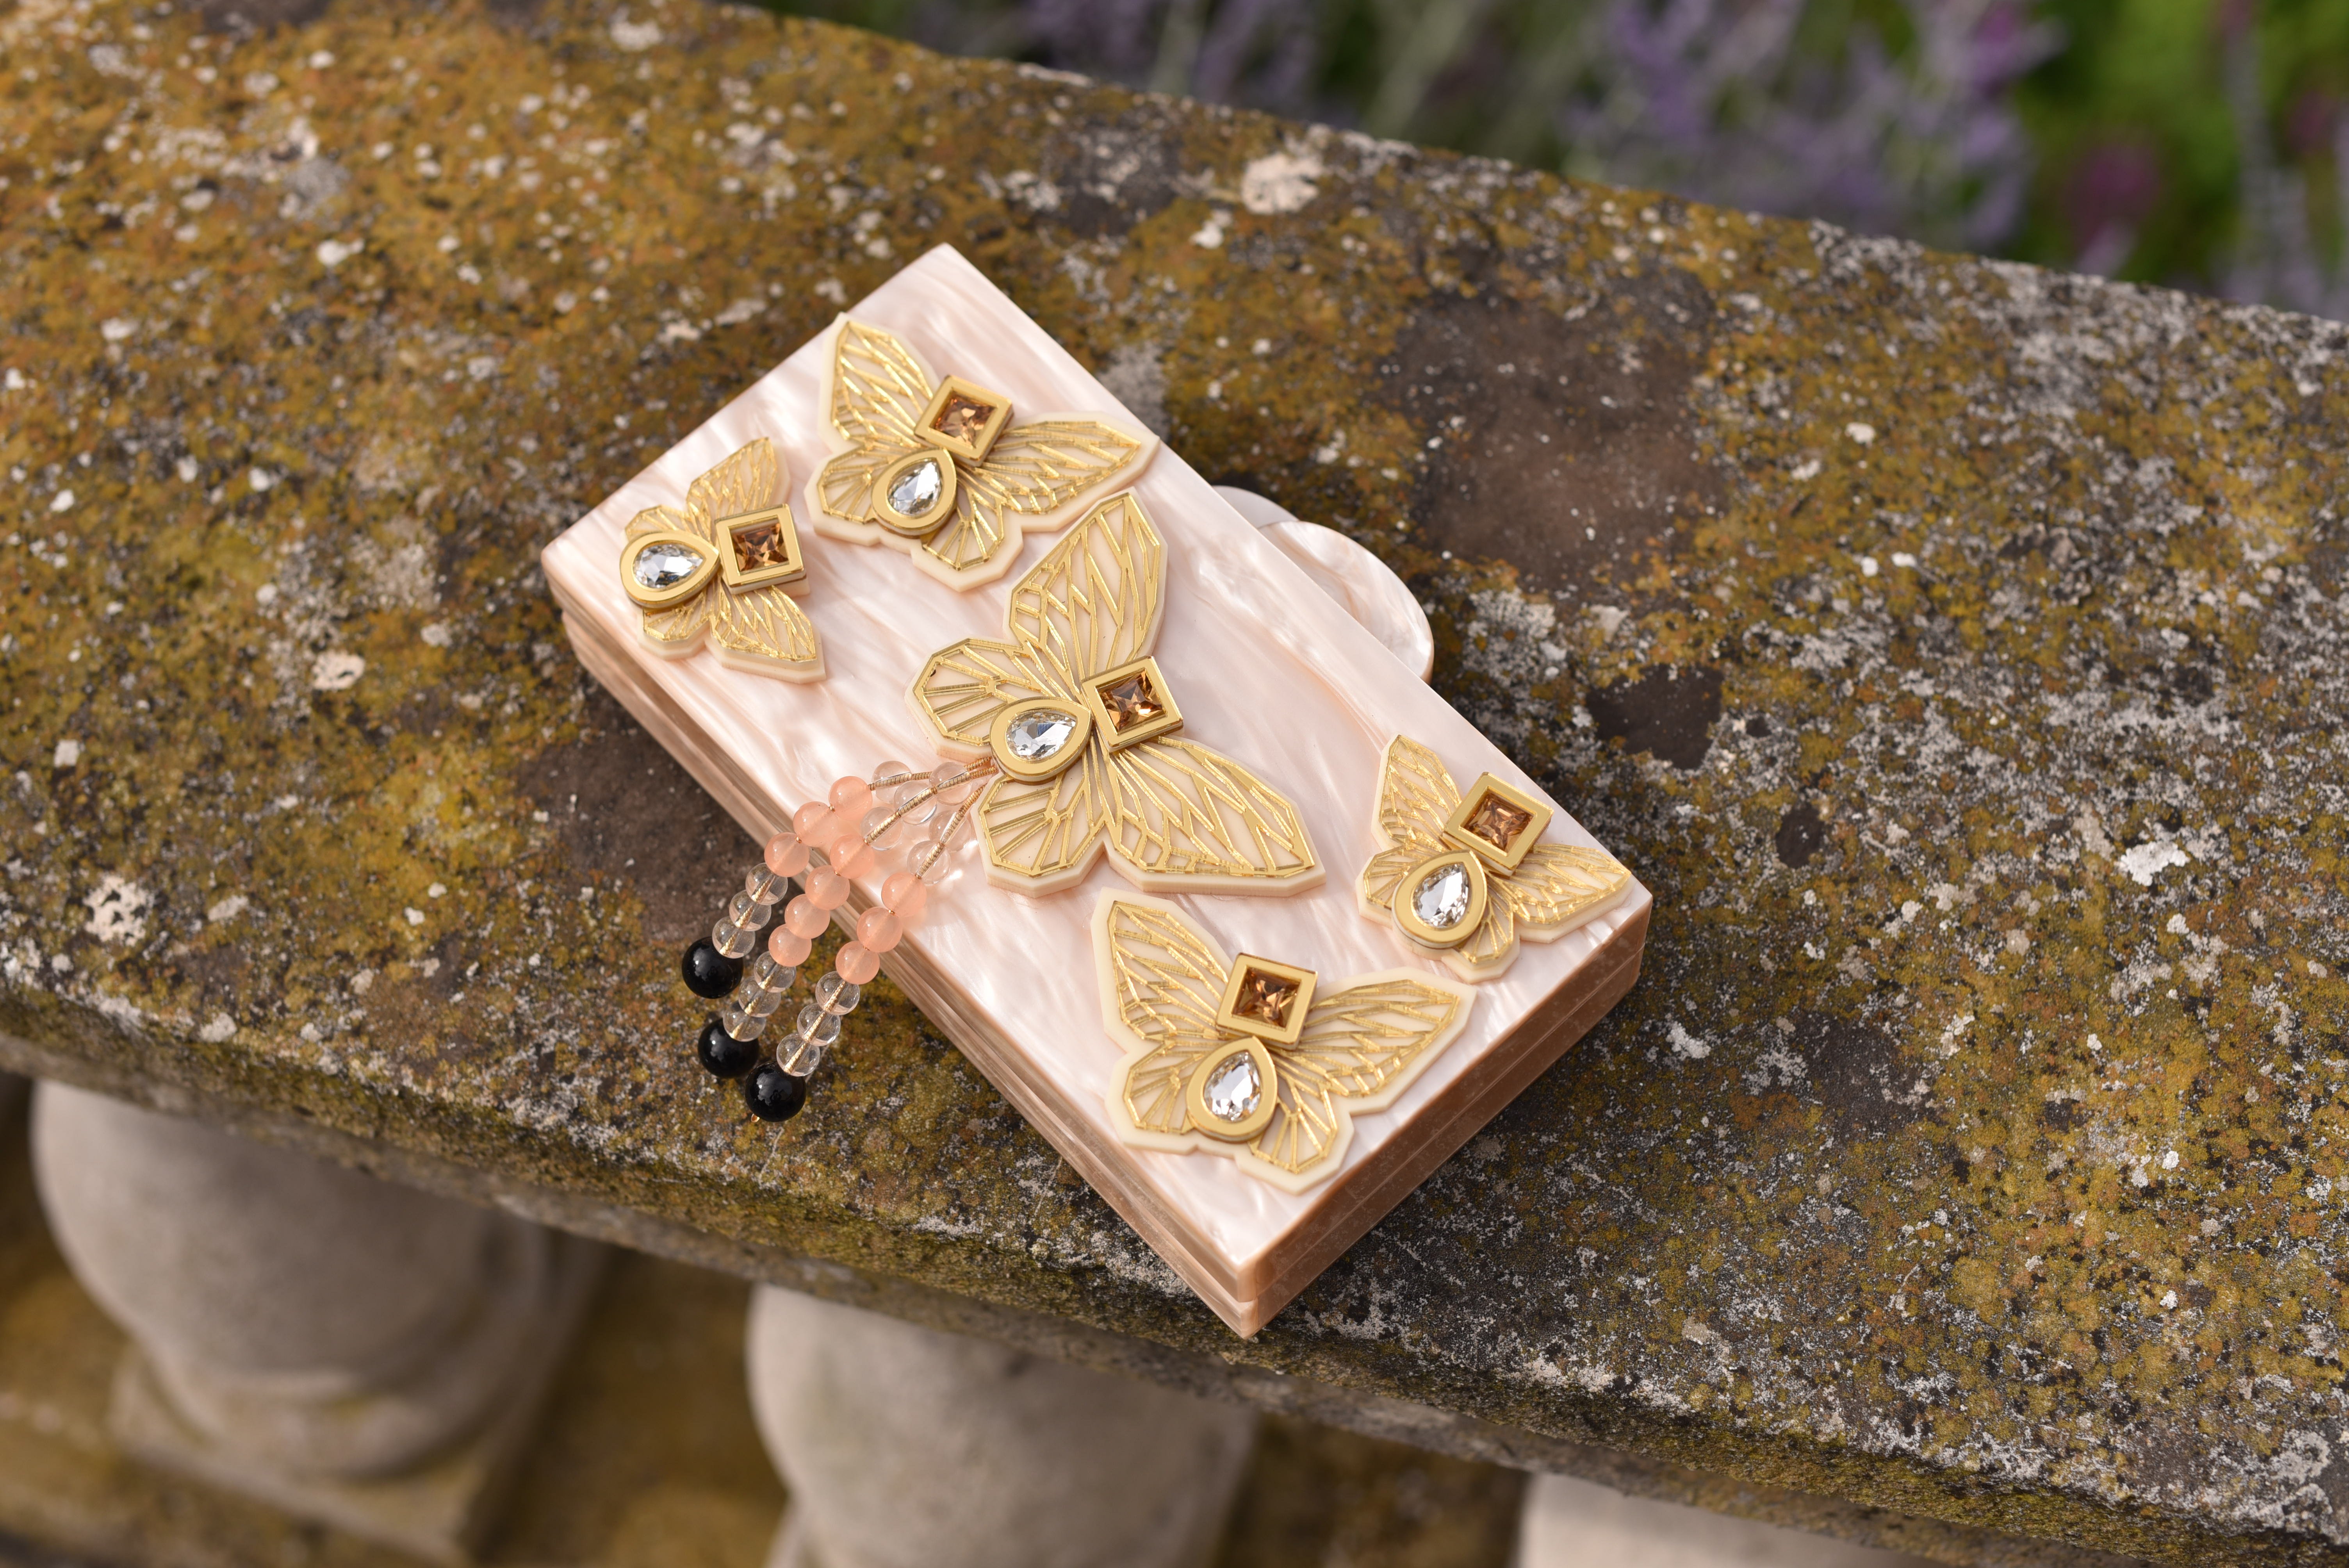 THE CREME BUTTERFLY CLUTCH 